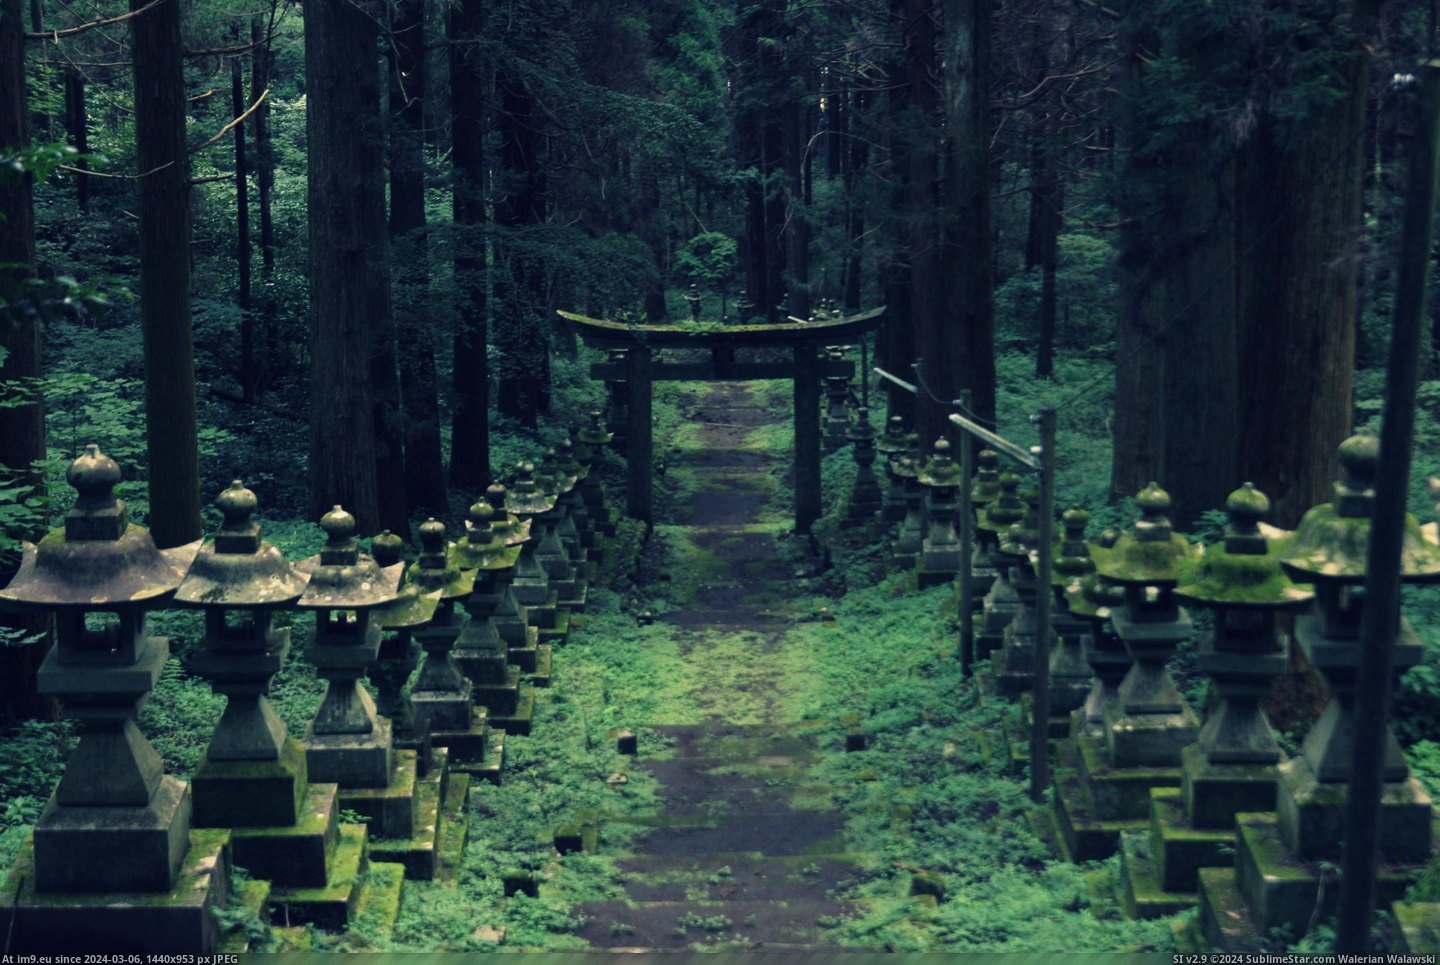 #Forest  #Shrine [Pics] Forest Shrine. Pic. (Image of album My r/PICS favs))